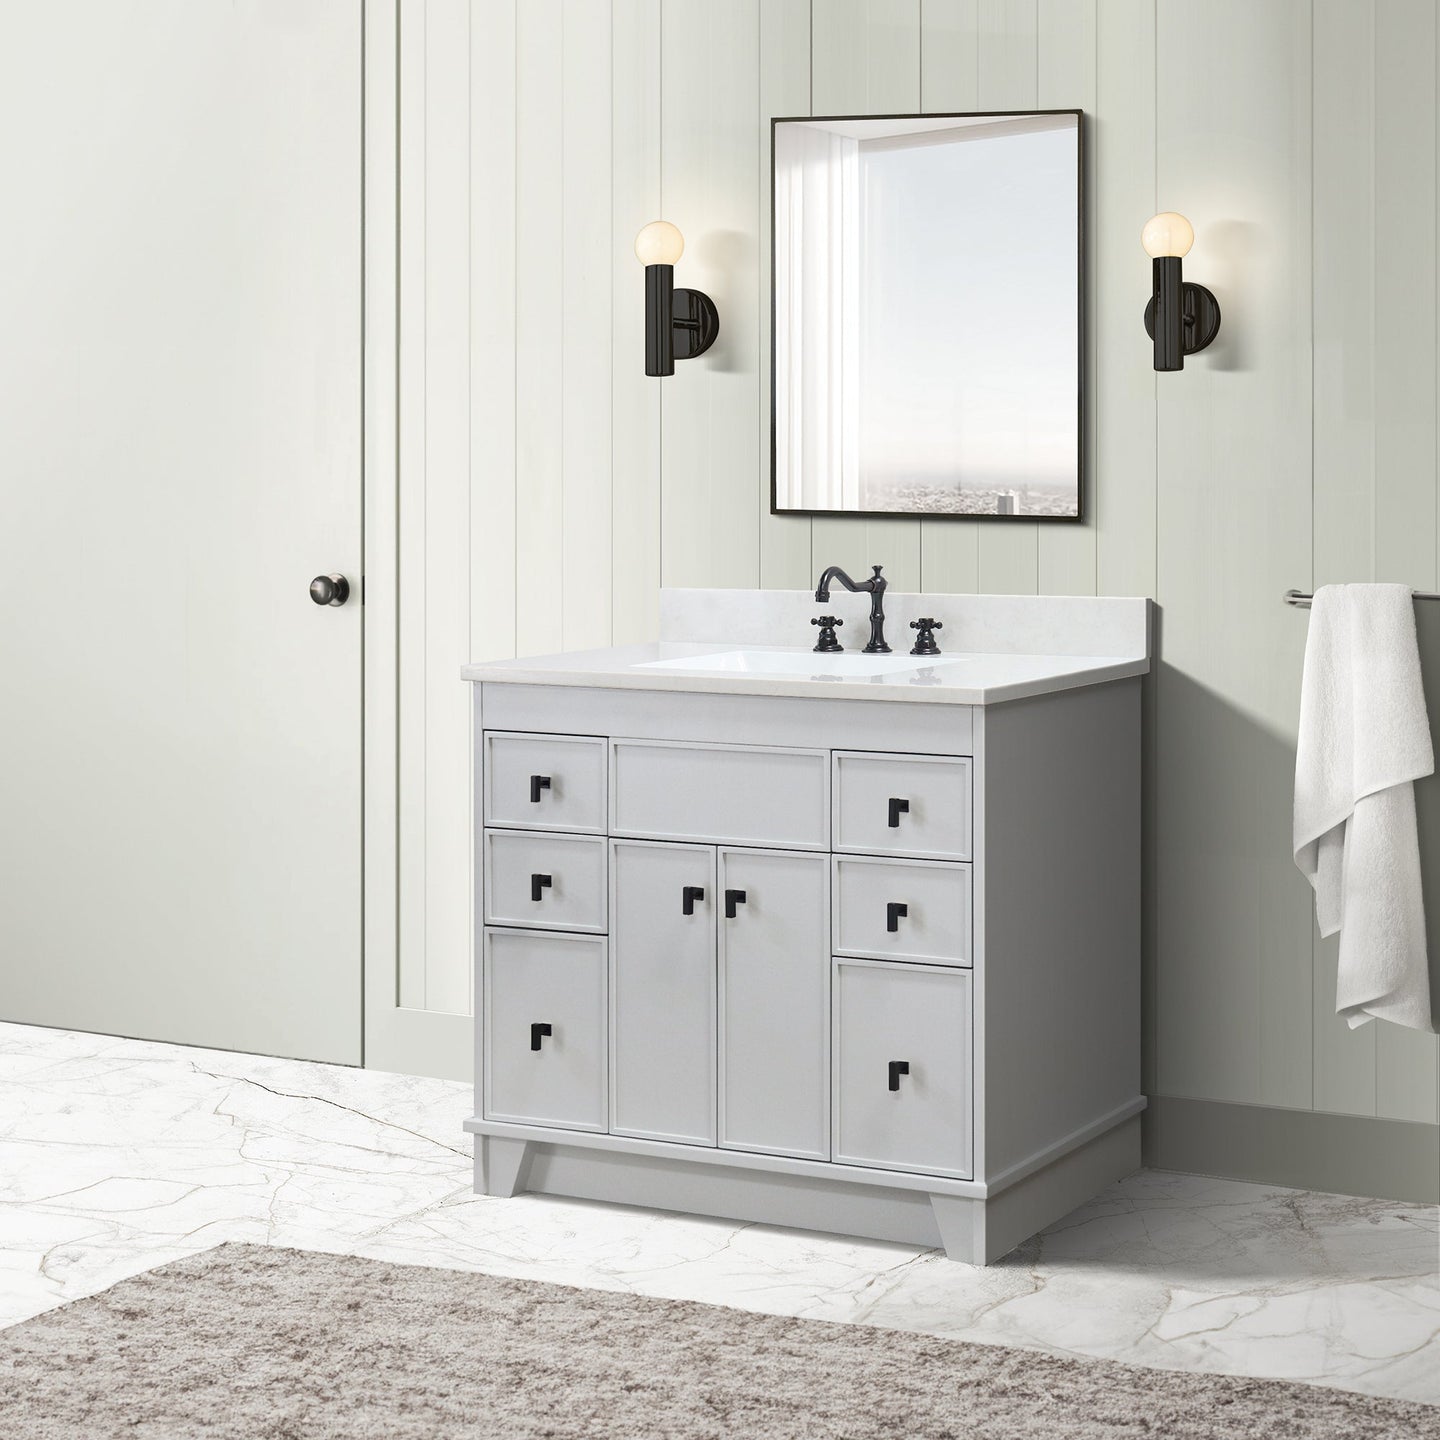 3922-BL-FG-AQ  39 in. Single Sink Vanity in French Gray finish with Engineered Quartz Top, mirror